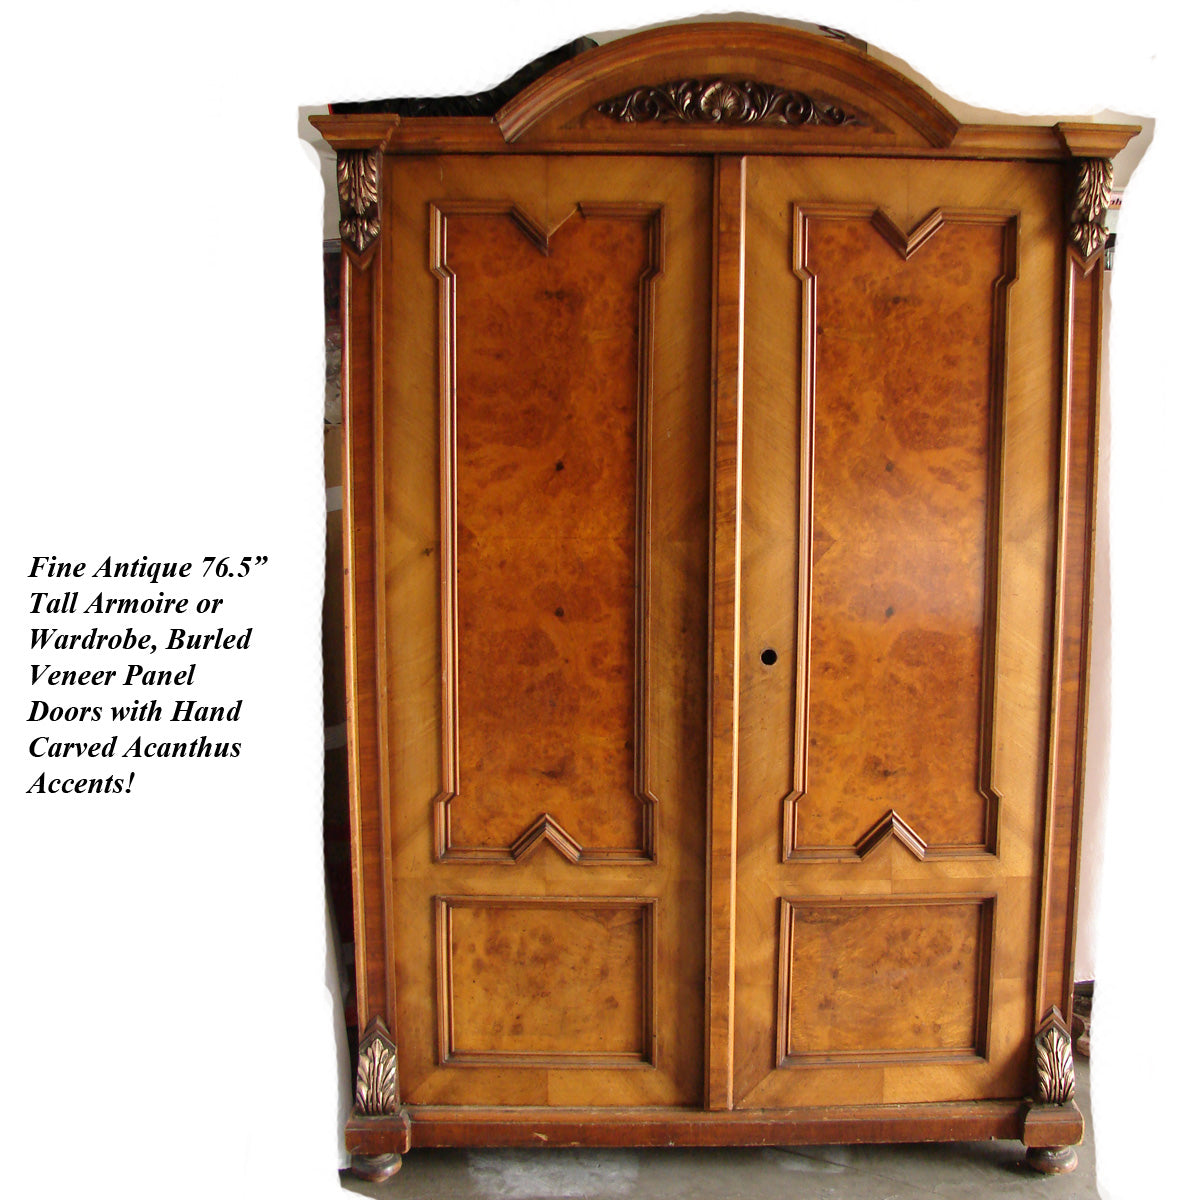 Antique 76.5" Tall Armoire or Wardrobe, Burled Veneer Doors with Carved & Gilded Acanthus Accents